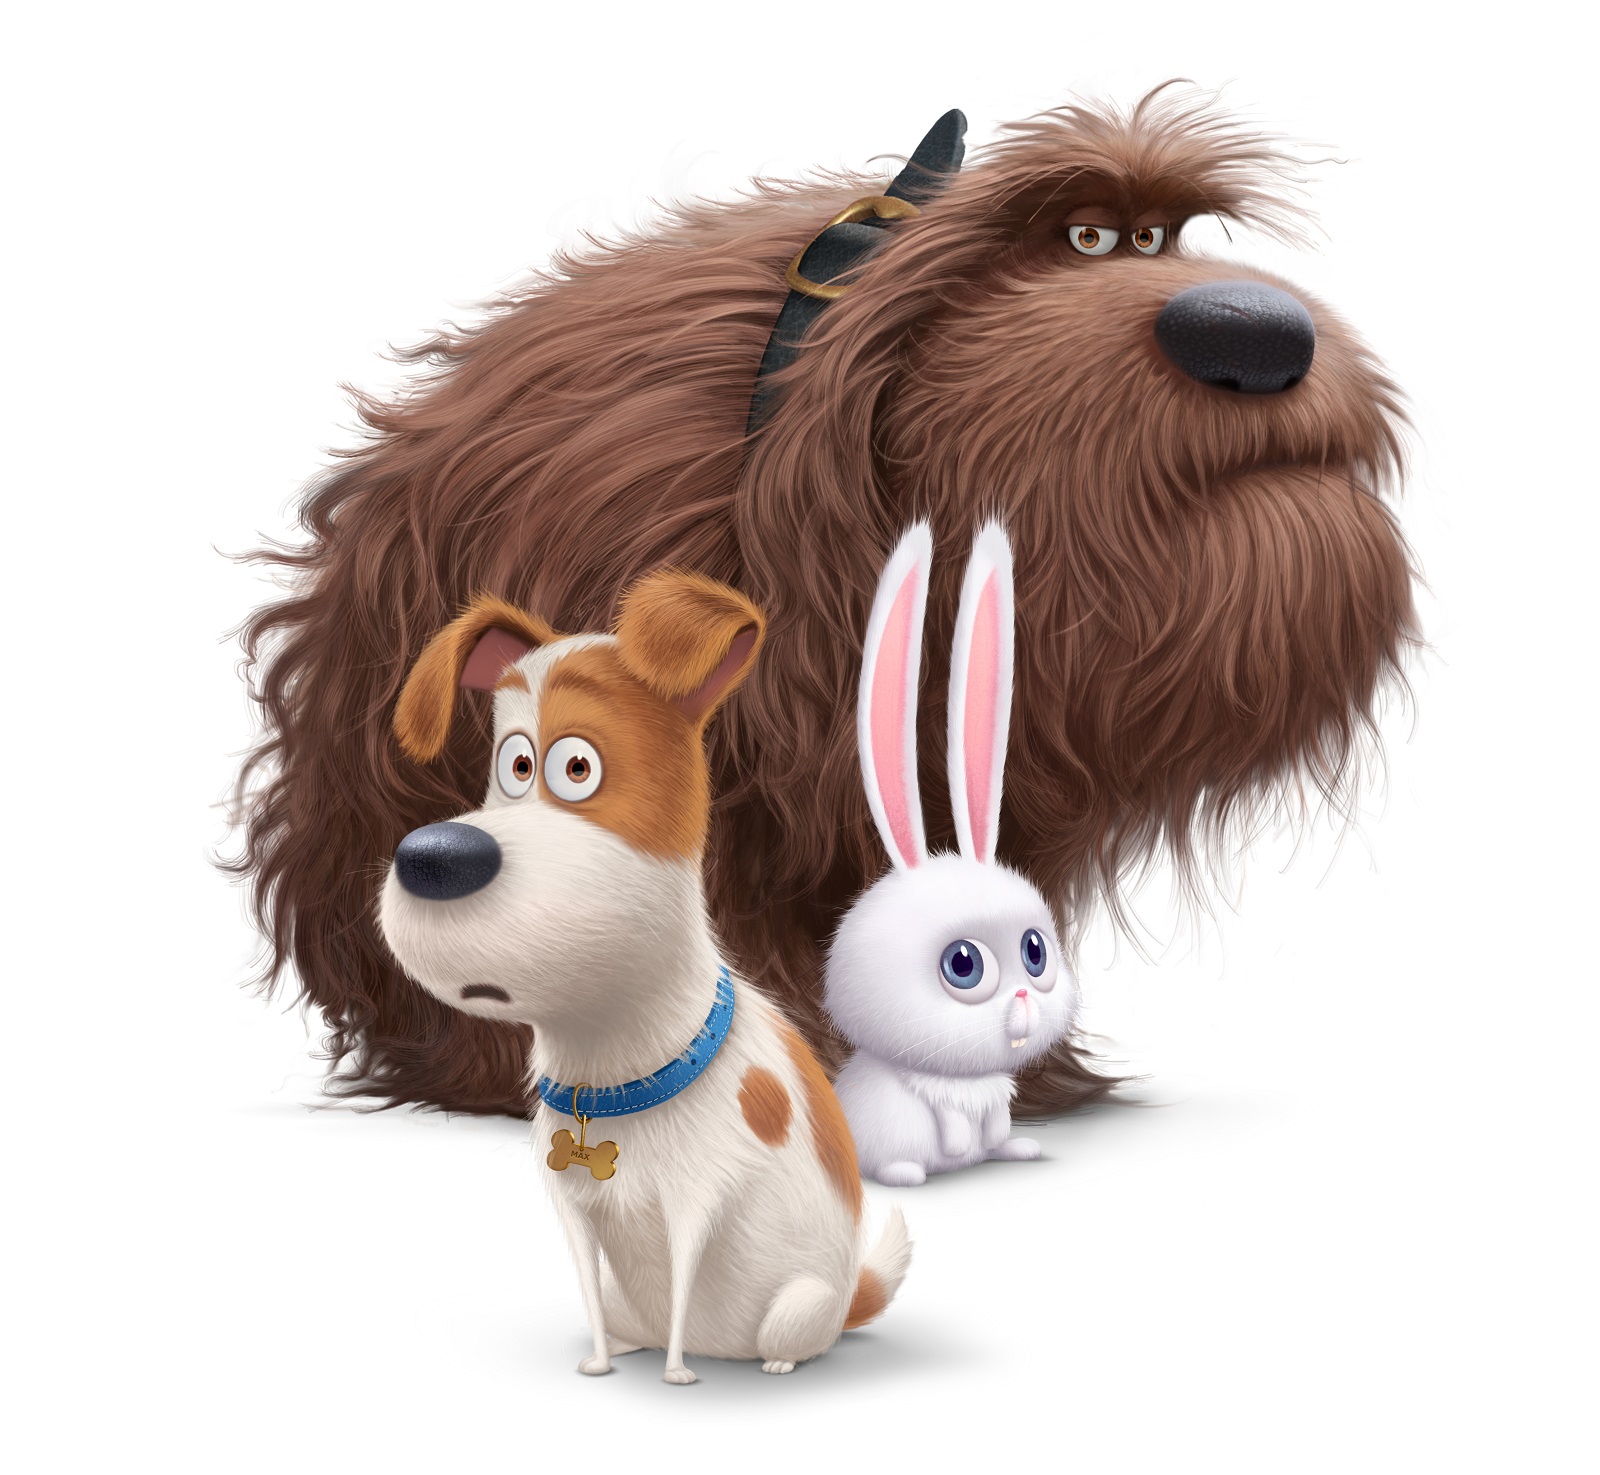 Go behind the scenes of The Secret Life Of Pets!